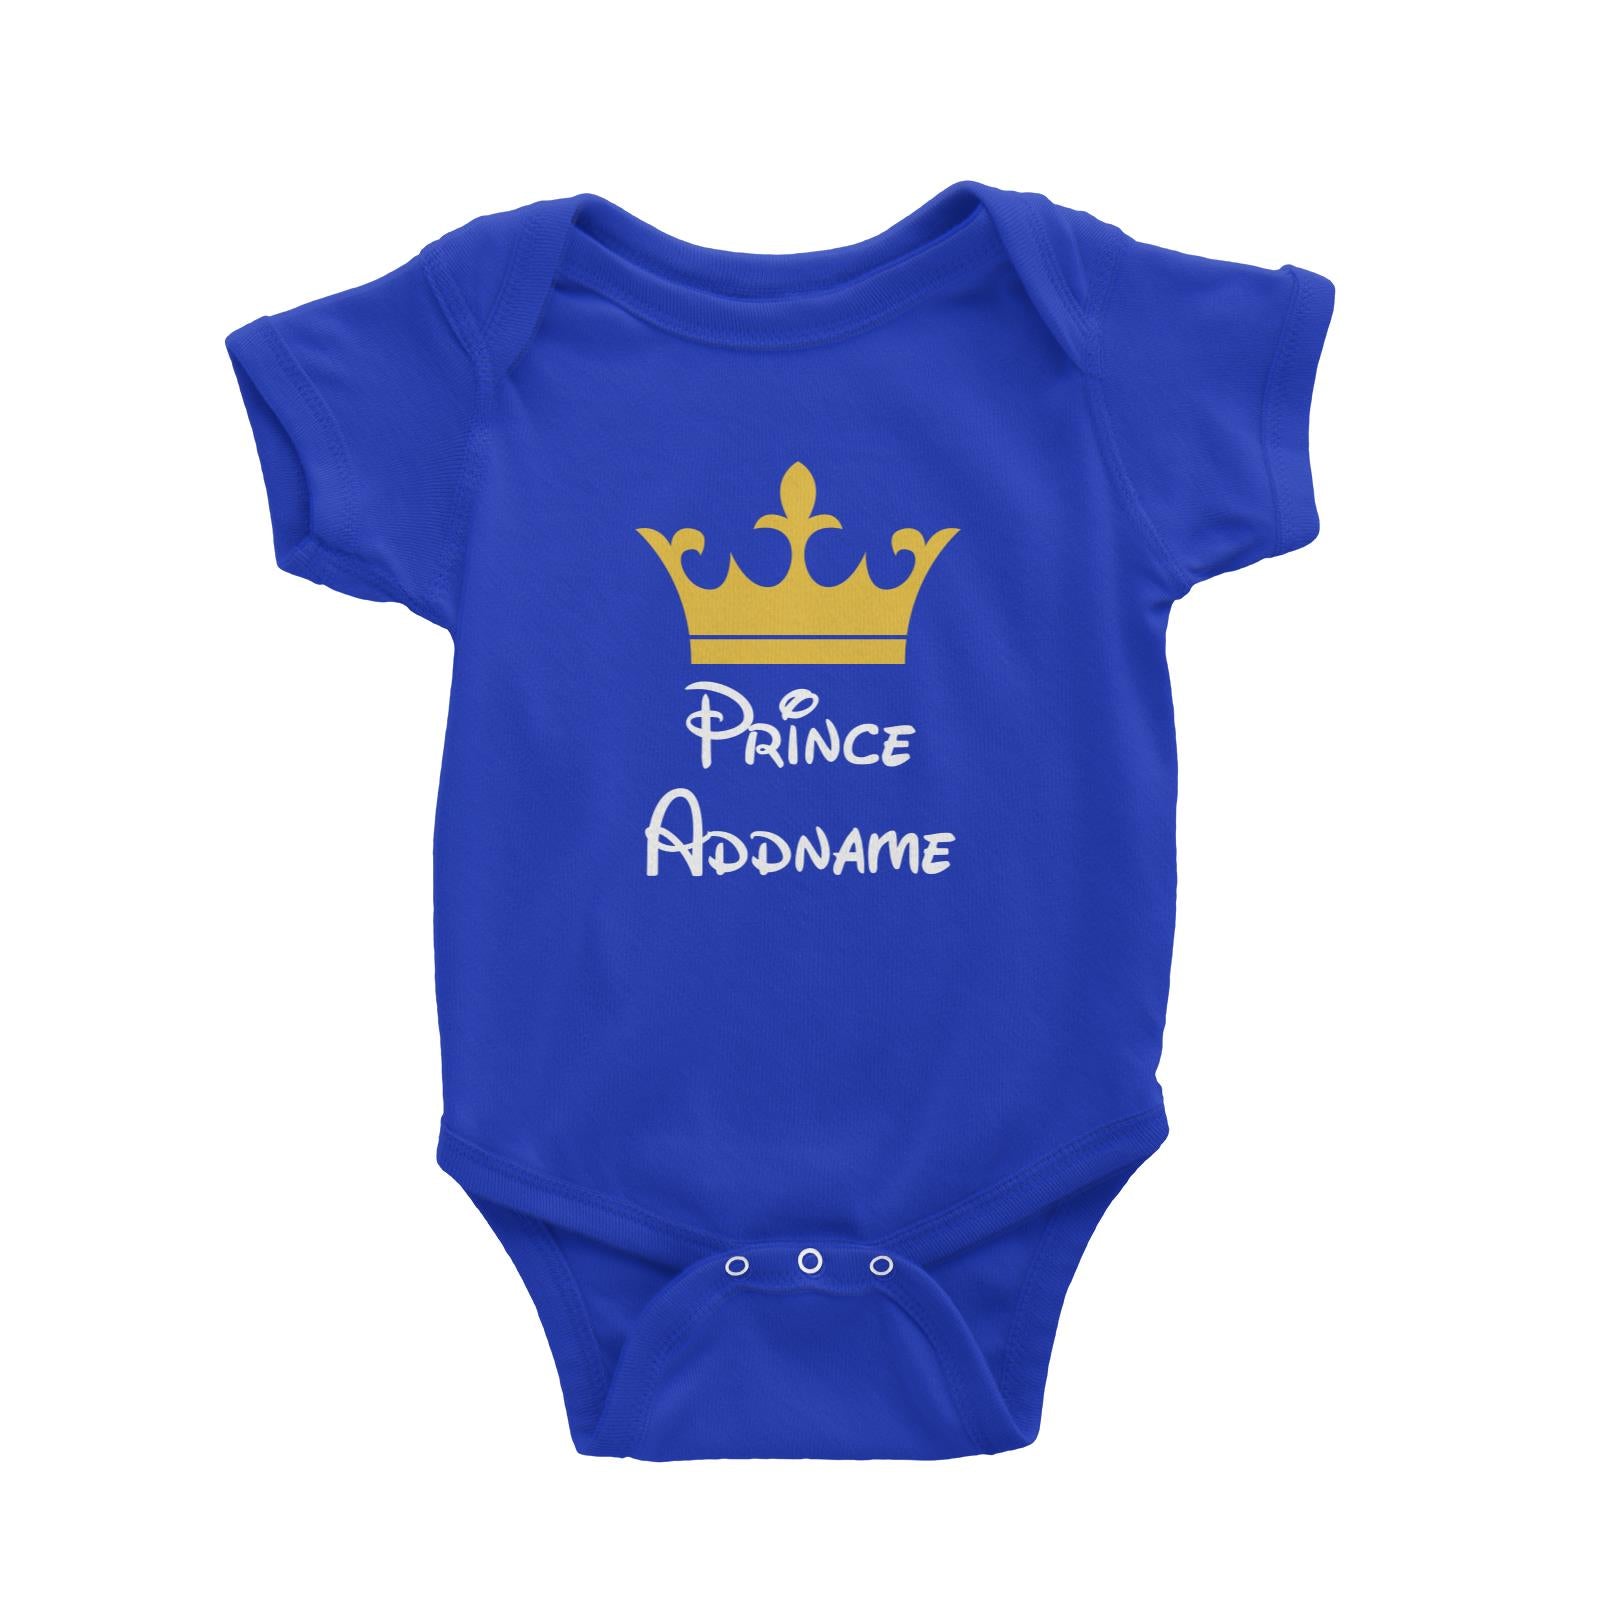 Royal Prince with Crown Addname Baby Romper